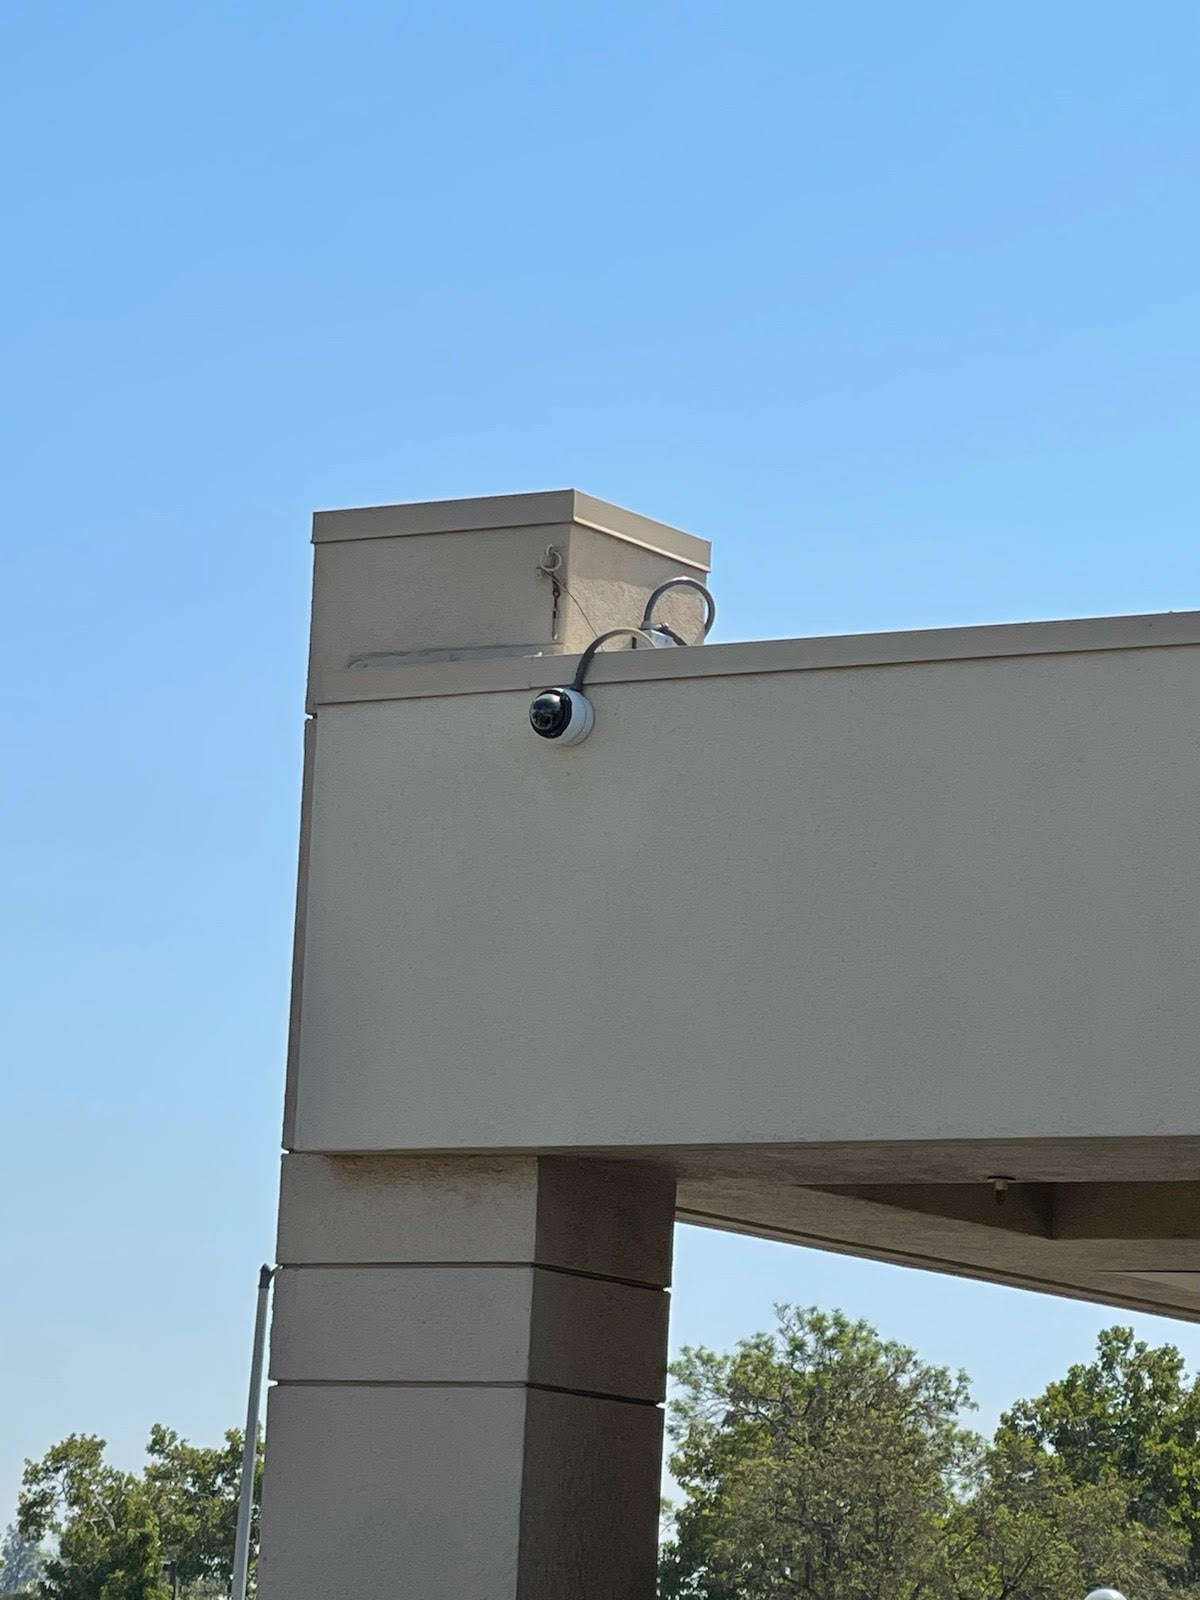   Chino Valley Medical Center, Upgraded old Coax System to New IP AI, IP Cameras  BN8029AVAIRAI, BN8029AI & BN8037AI